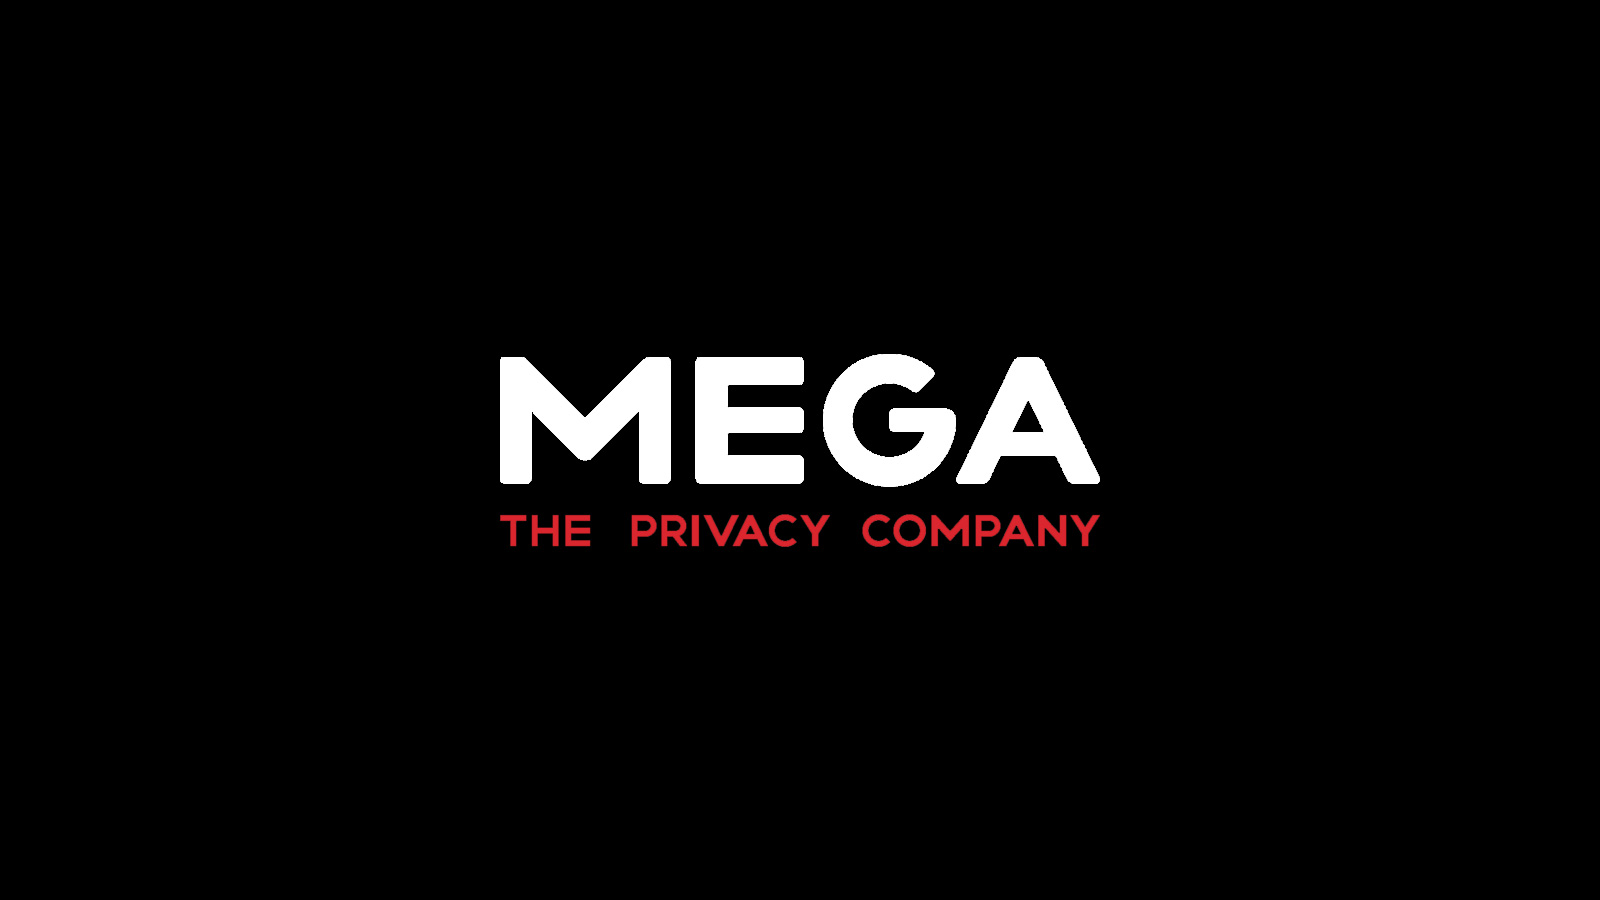 MEGA fixes critical flaws that allowed the decryption of user data